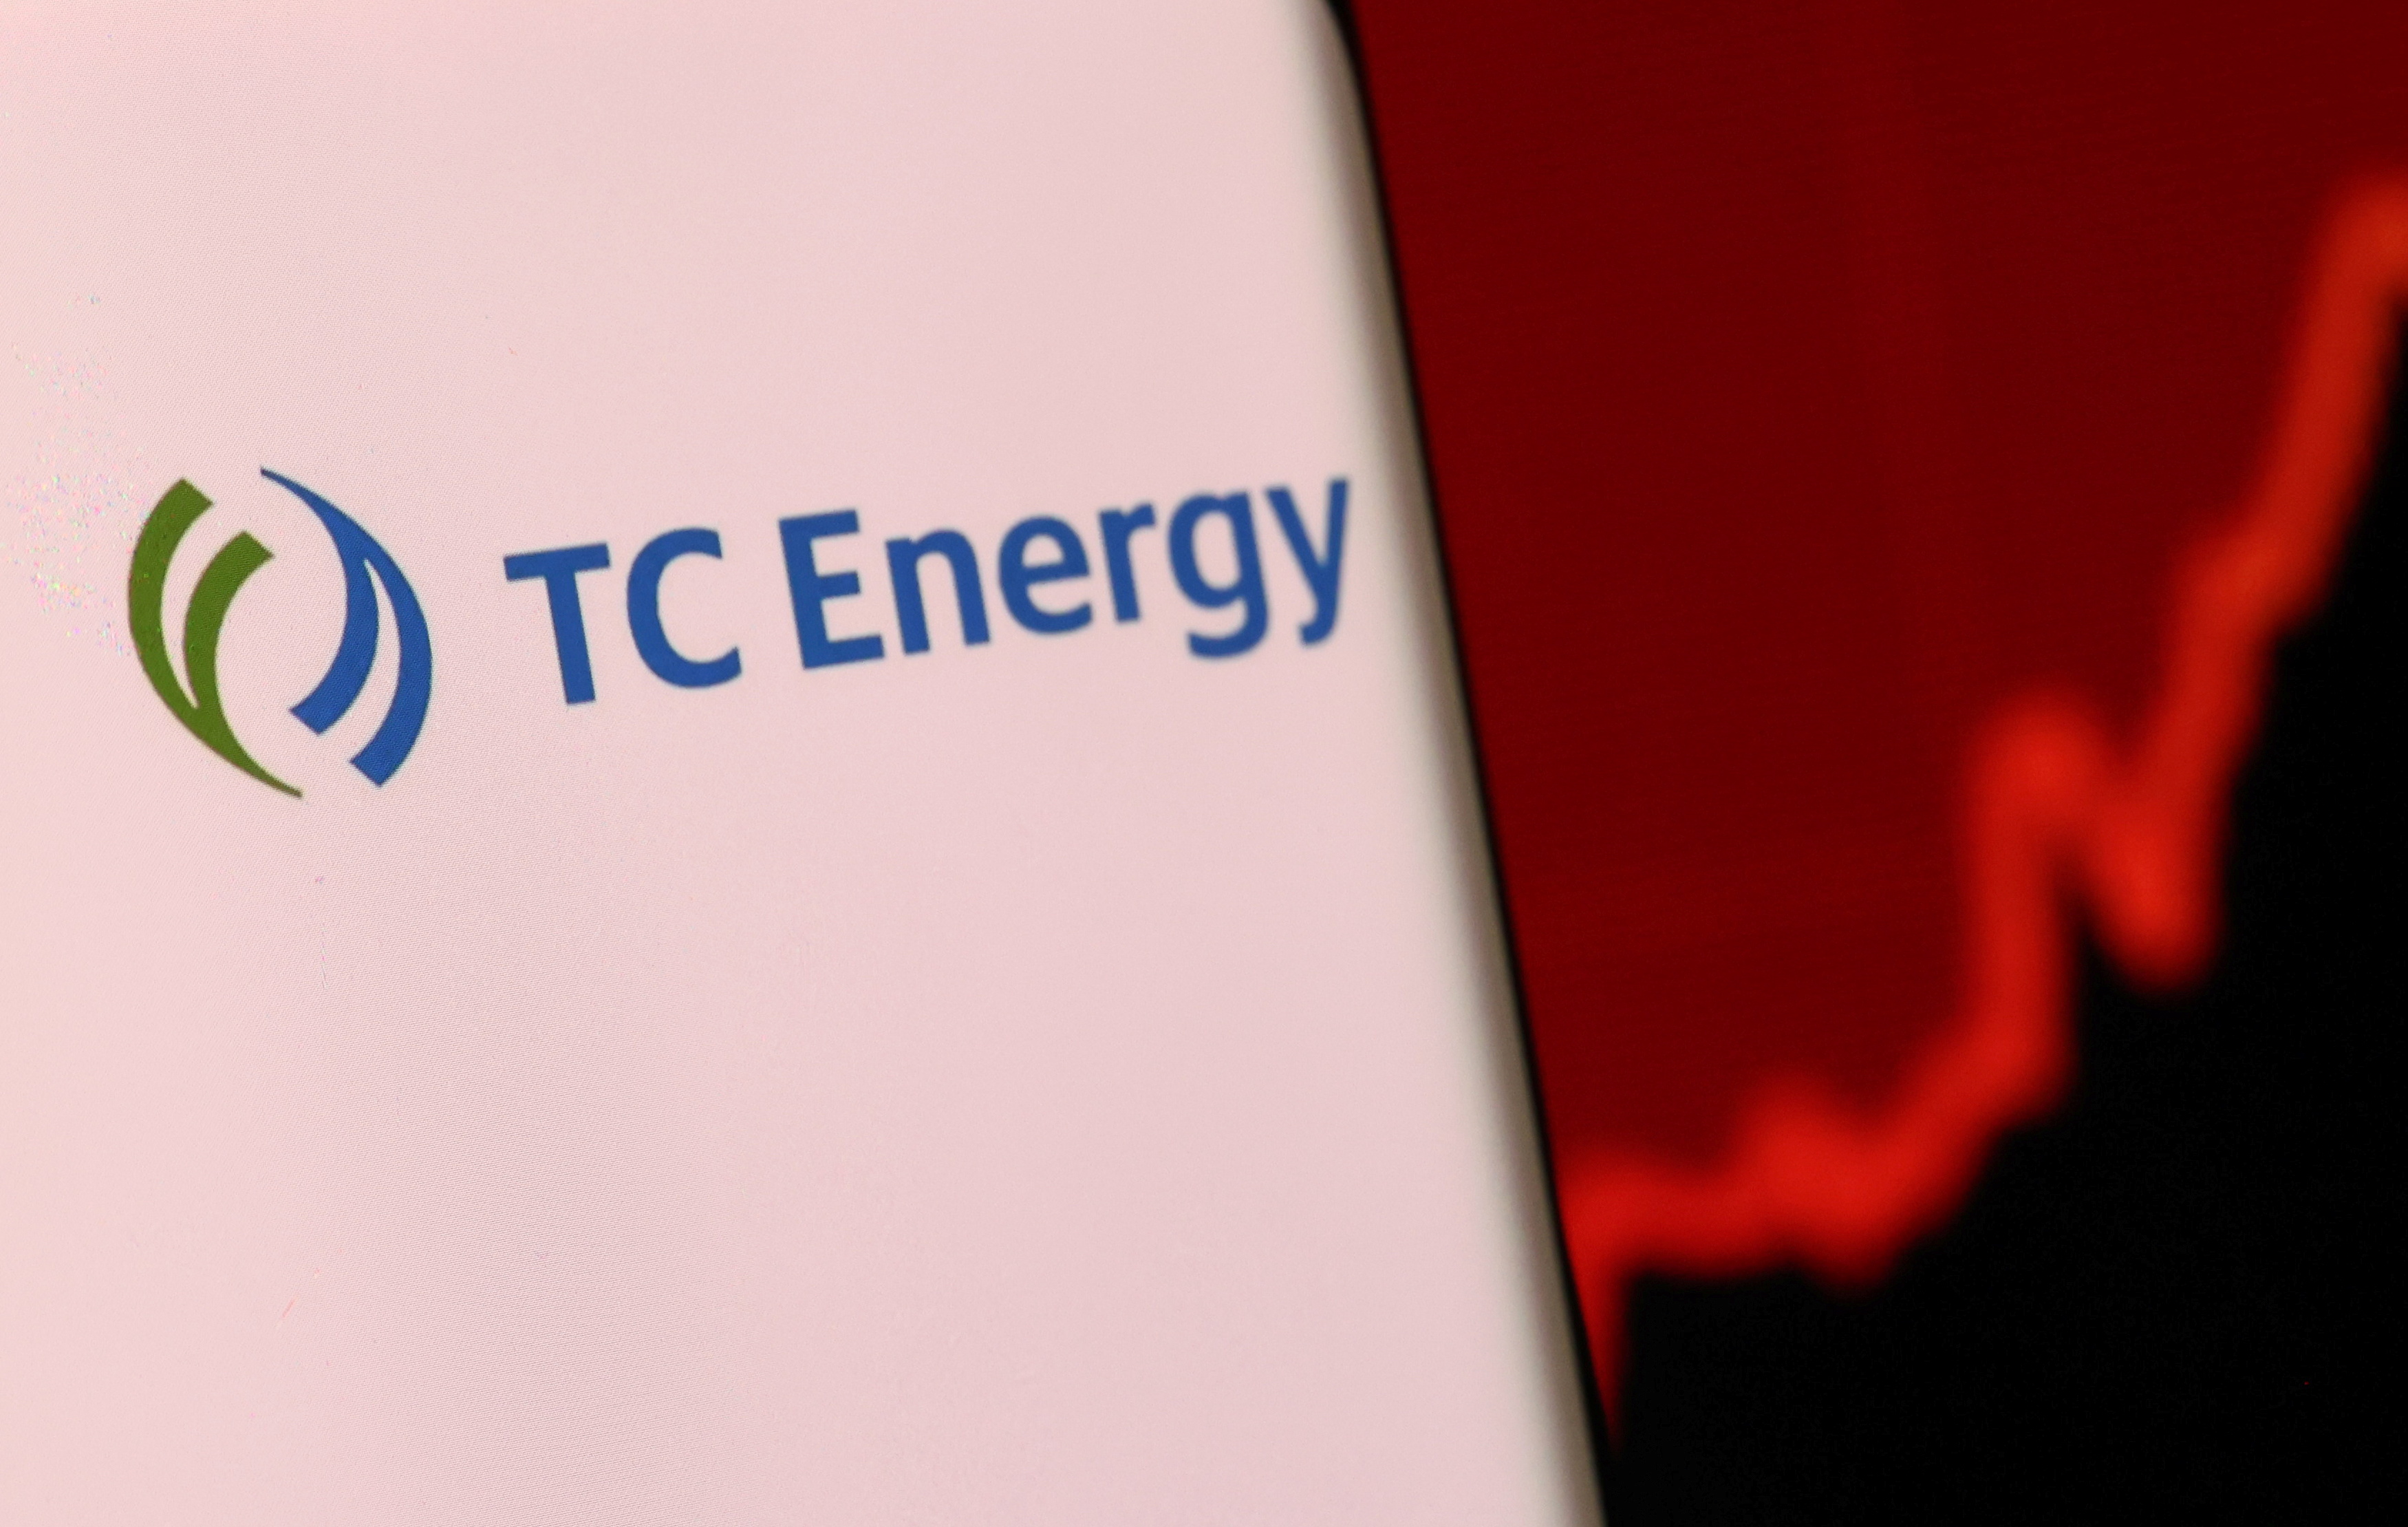 Illustration shows smartphone with TC Energy's logo